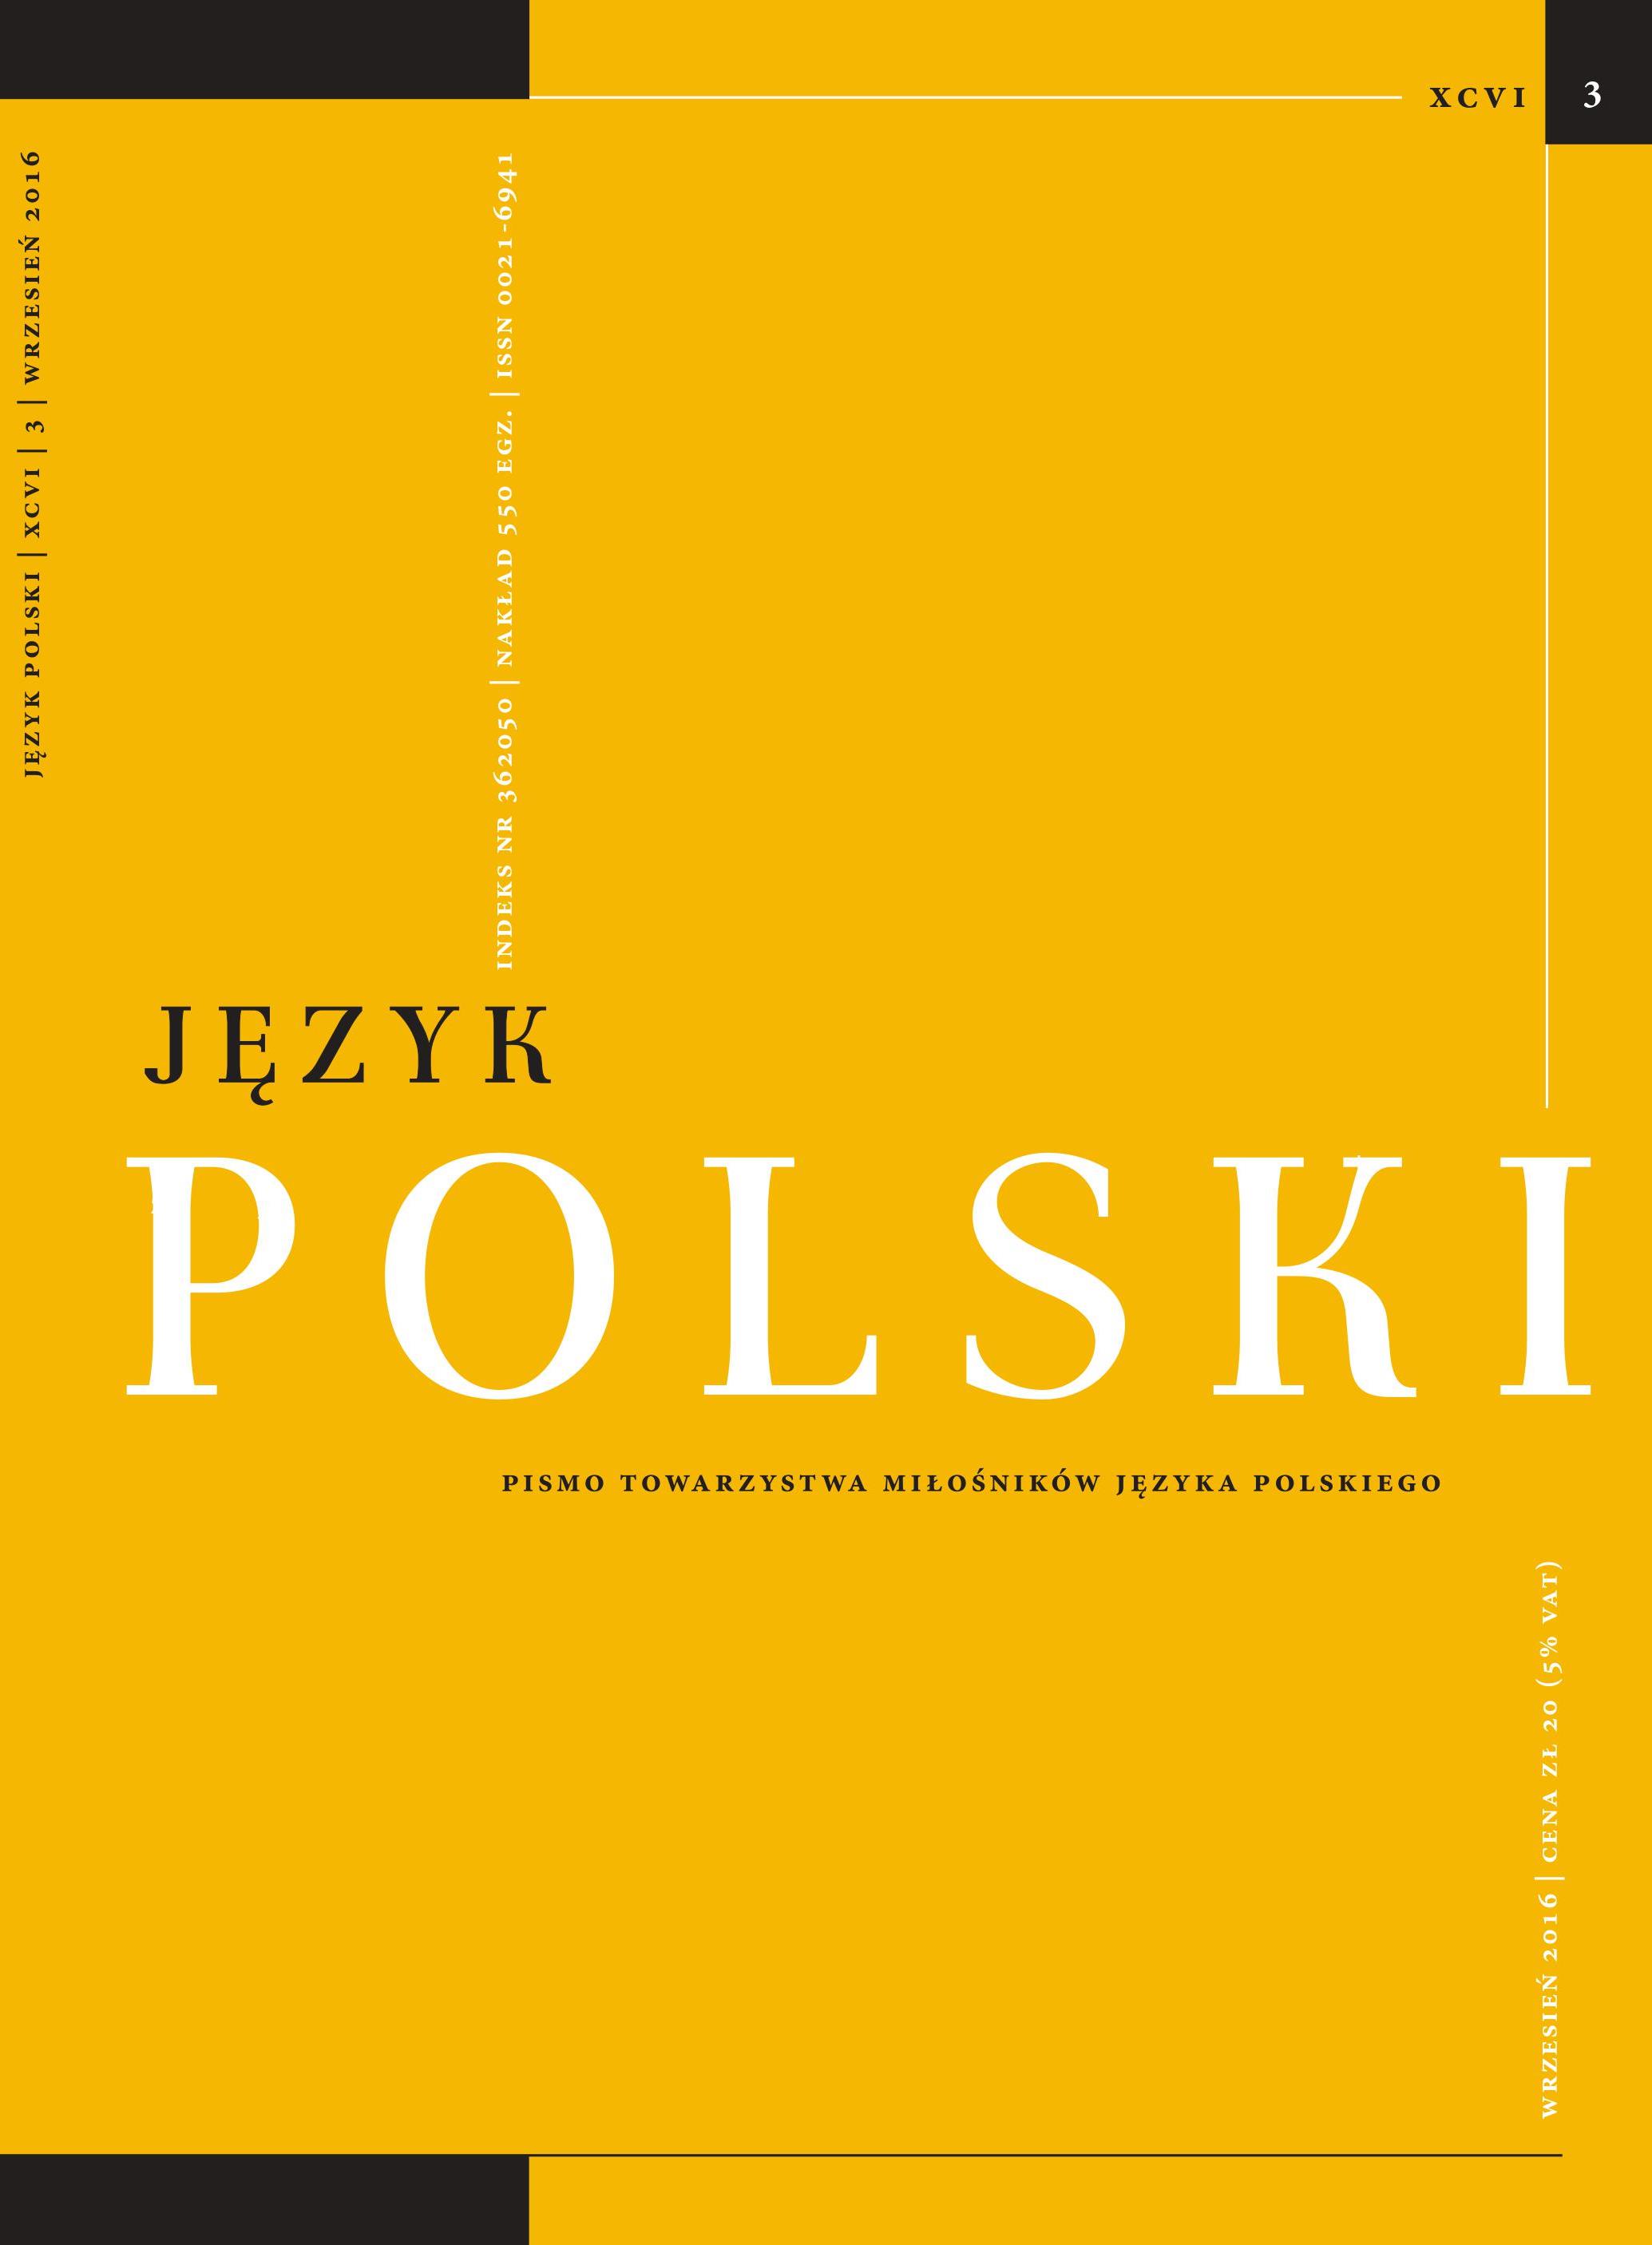 Whom or what can we "zaorać"’? Cover Image